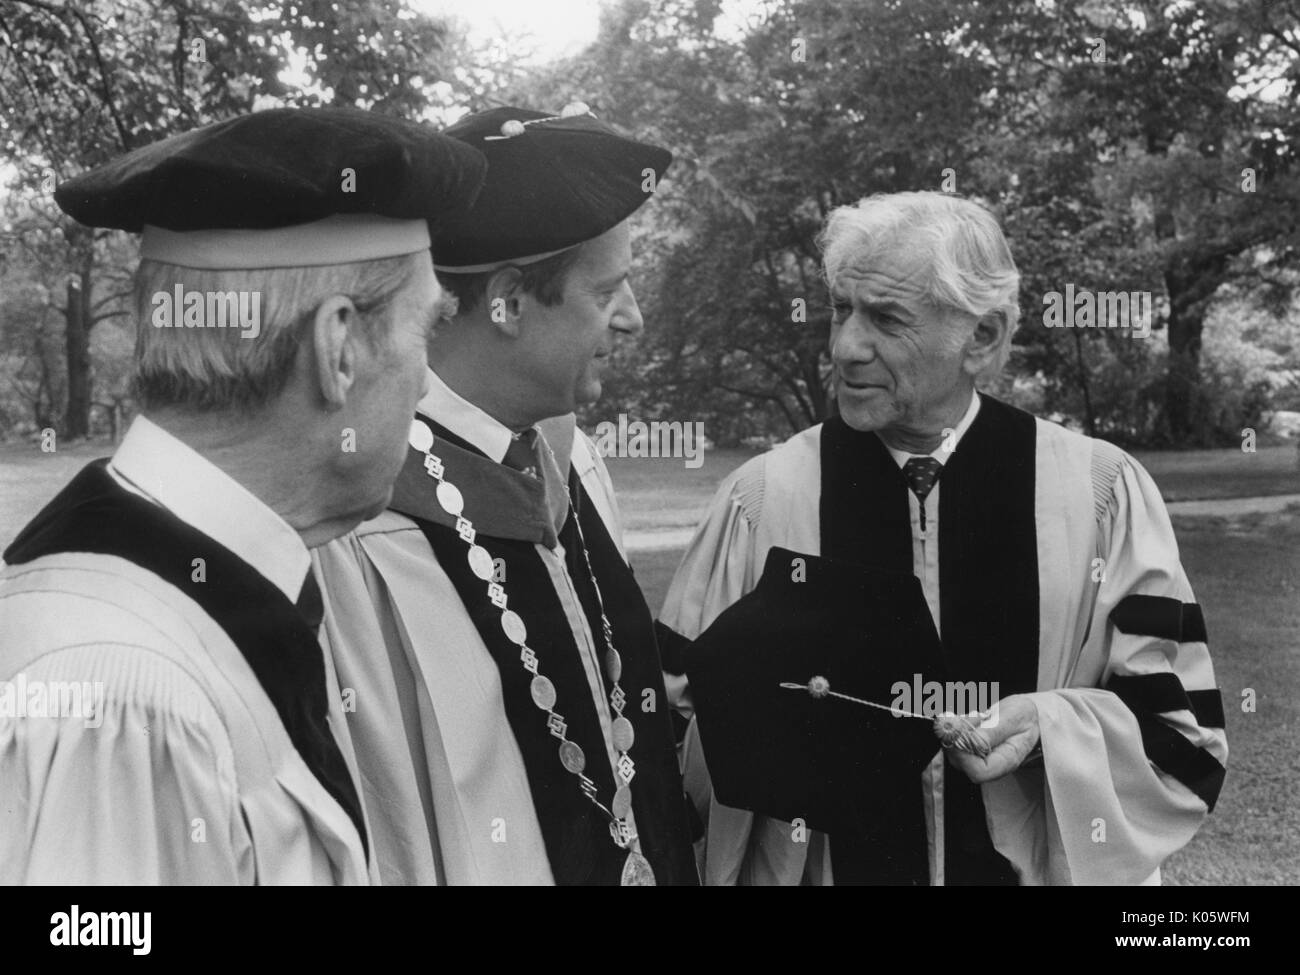 Half-length portrait of two Johns Hopkins professors and the President, Steven Muller, with American composer and pianist Leonard Bernstein on his right, all three men adorned in caps and gown, standing on the grass outside, Bernstein removing his hat and holding it in his hands, serious facial expressions, 1980. Stock Photo